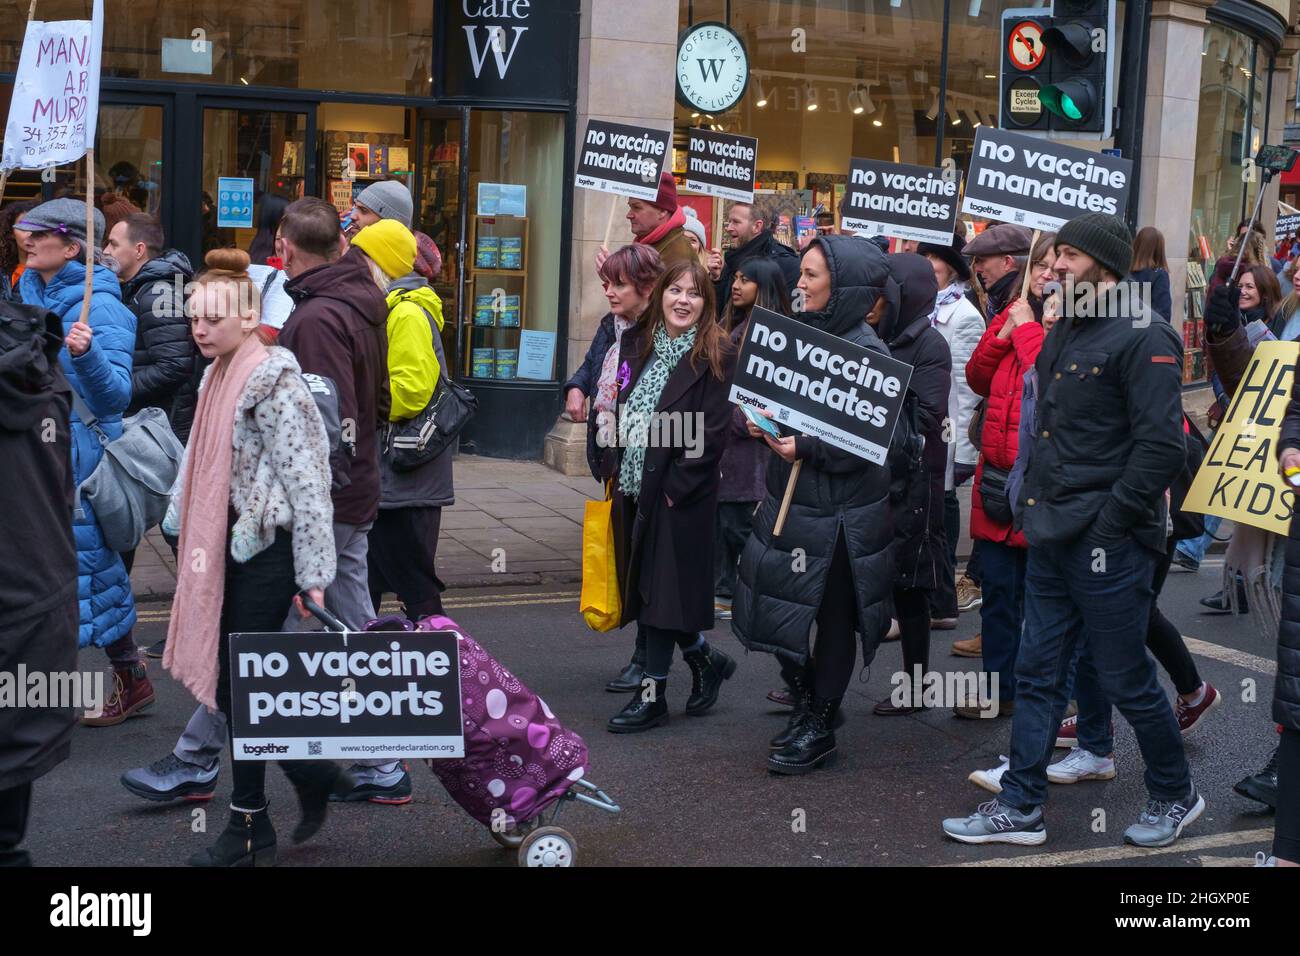 A protest demonstration and march for NHS staff protesting against vaccine mandates or vaccine passports in Oxford, UK Stock Photo